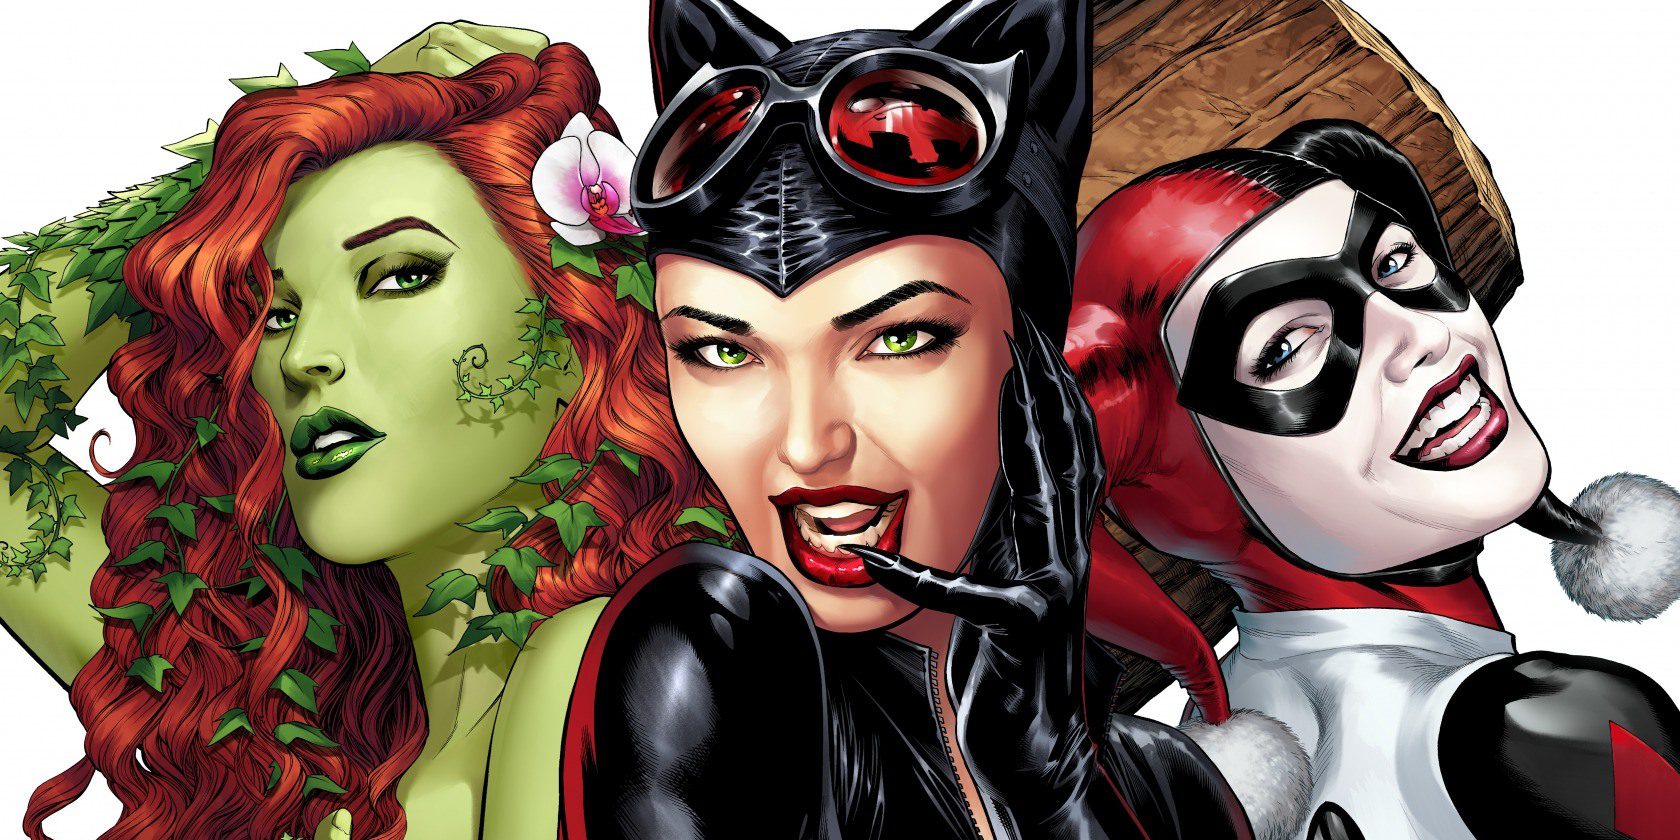 SDCC 2017: Suicide Squad Director David Ayers on Directing Gotham City Sirens